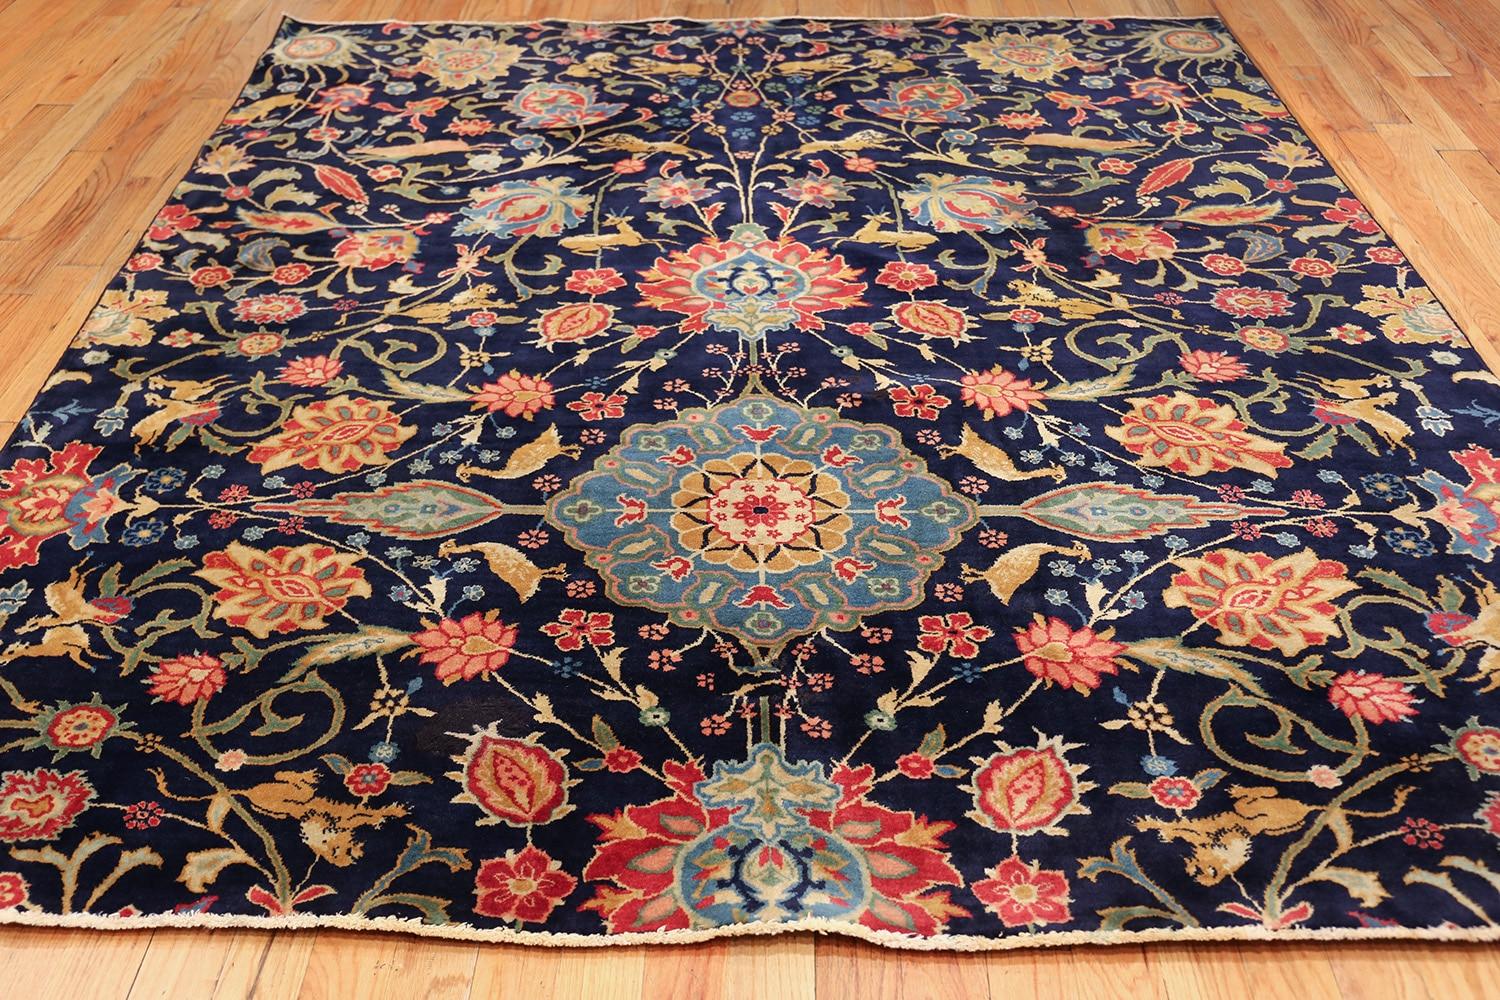 Fine antique Indian Agra rug, country of origin: India, circa 1900. Size: 7 ft 4 in x 7 ft 11 in (2.24 m x 2.41 m). 

 